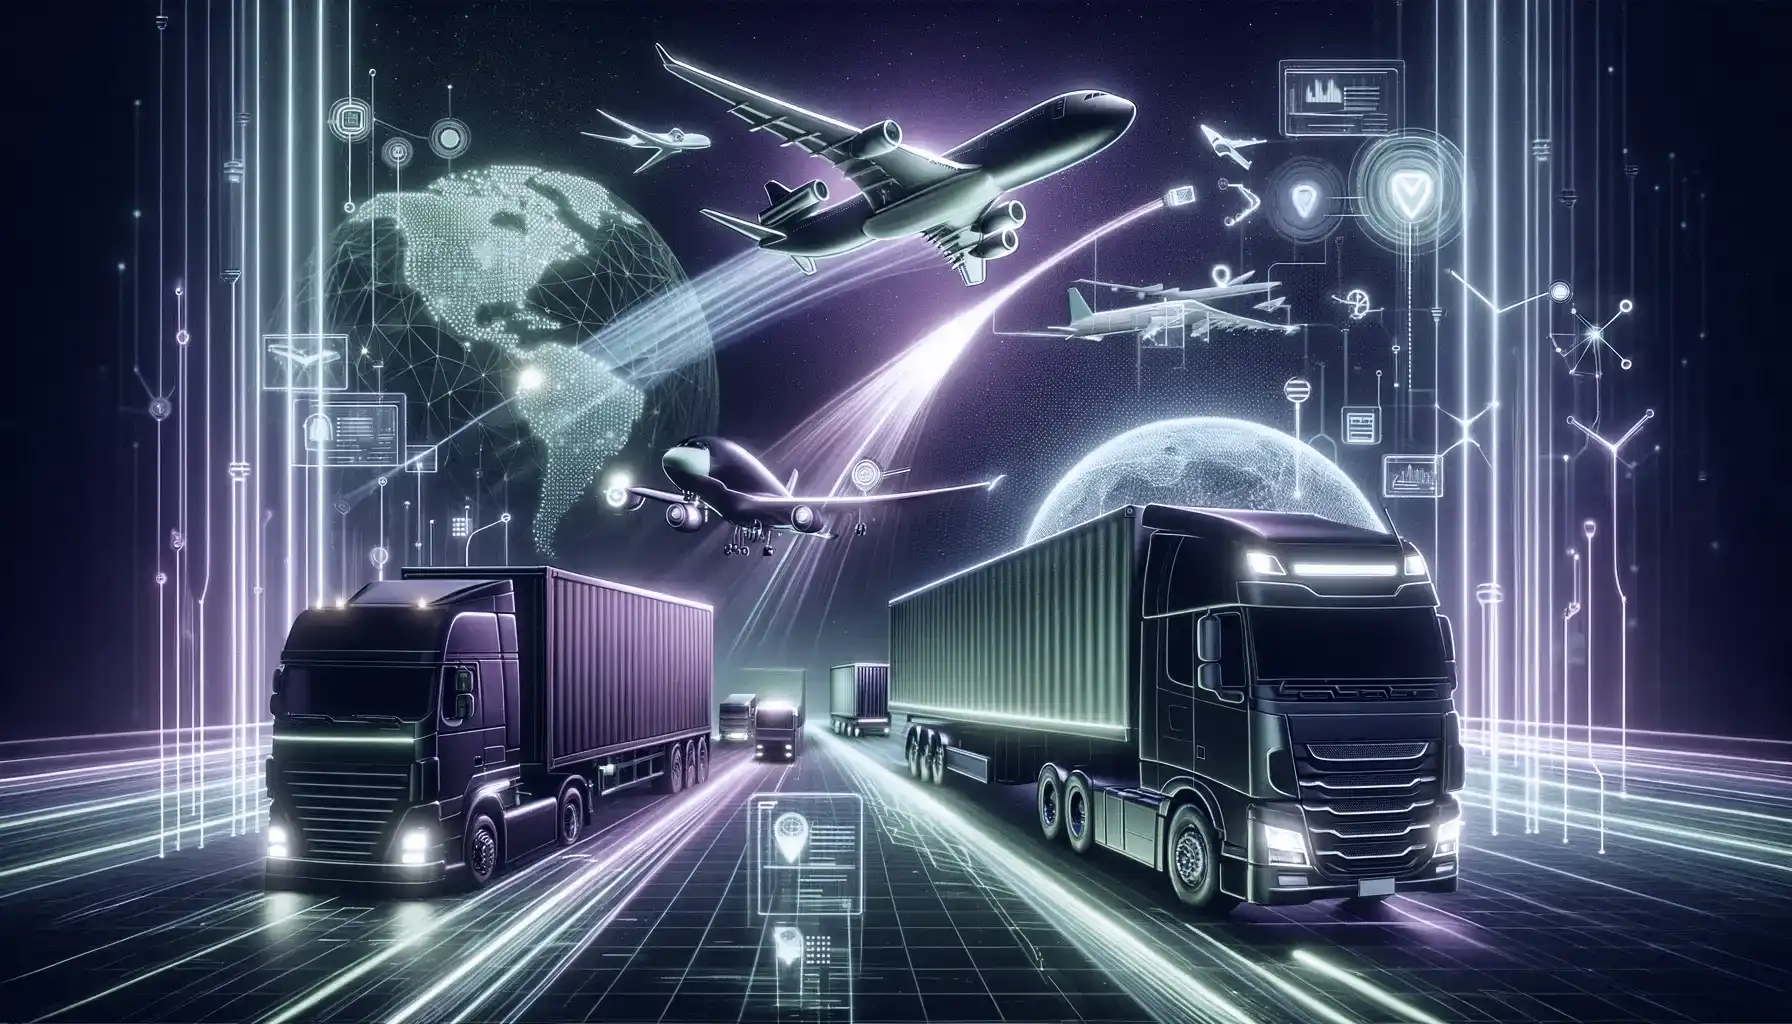 Image depicting a high-tech supply chain scene with key elements like a freight truck, airplane, and cargo boat, all illuminated in striking neon green and purple lights. These vehicles are integrated into a dynamic logistics operation, surrounded by digital elements such as data streams and network connections, emphasizing their crucial role in modern supply chain management. The background is abstract and futuristic, reinforcing the theme of innovative and advanced supply chain technology